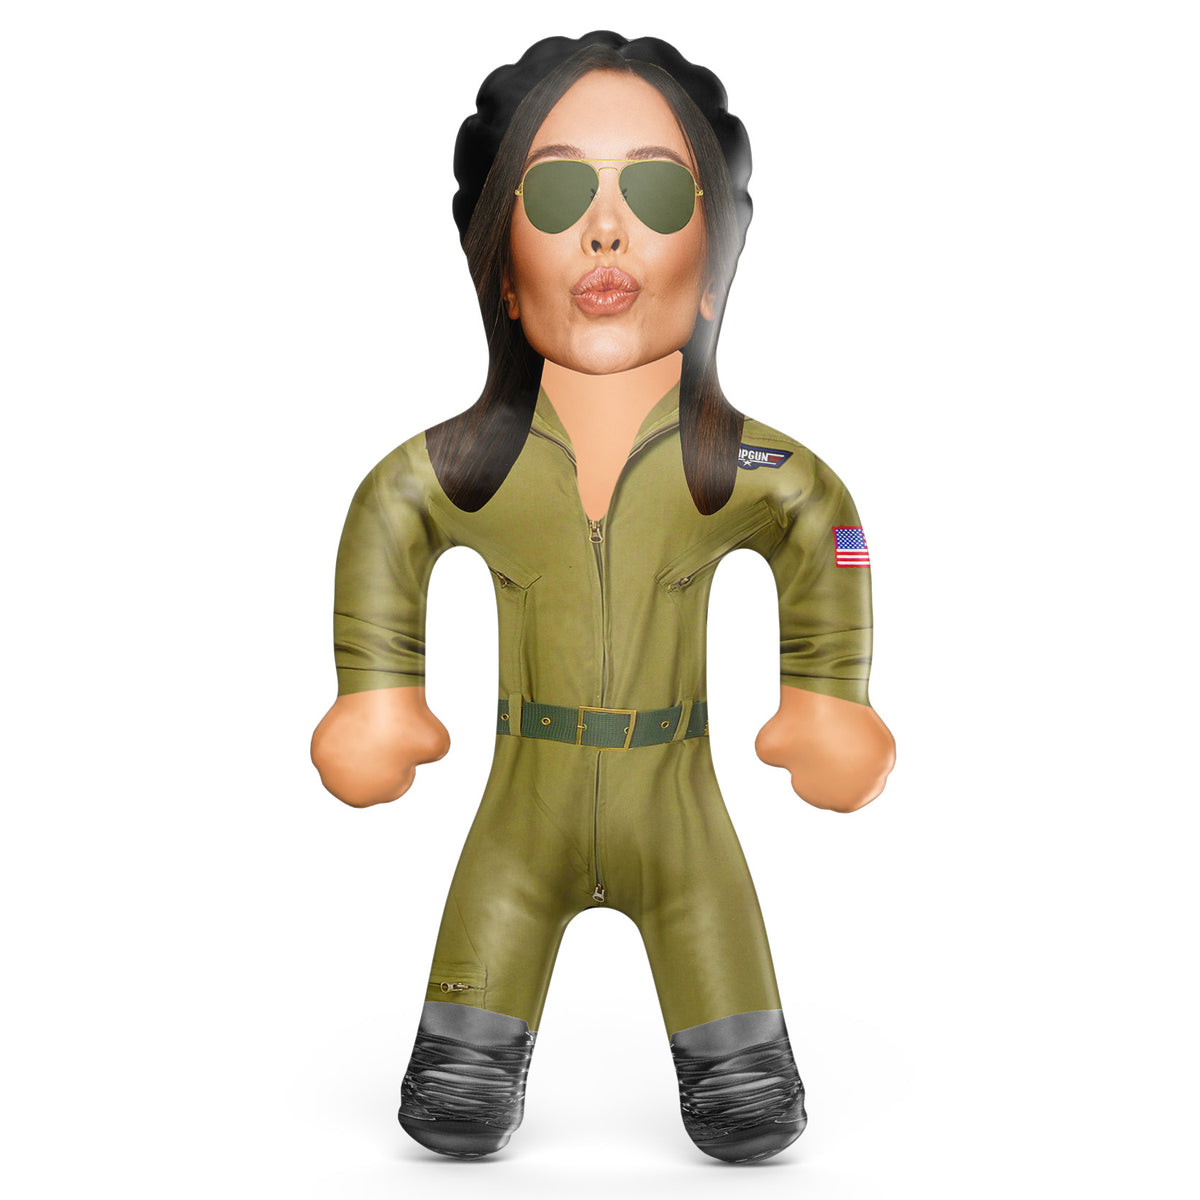 Naval Aviator Inflatable Doll - Naval Aviator Blow Up Doll